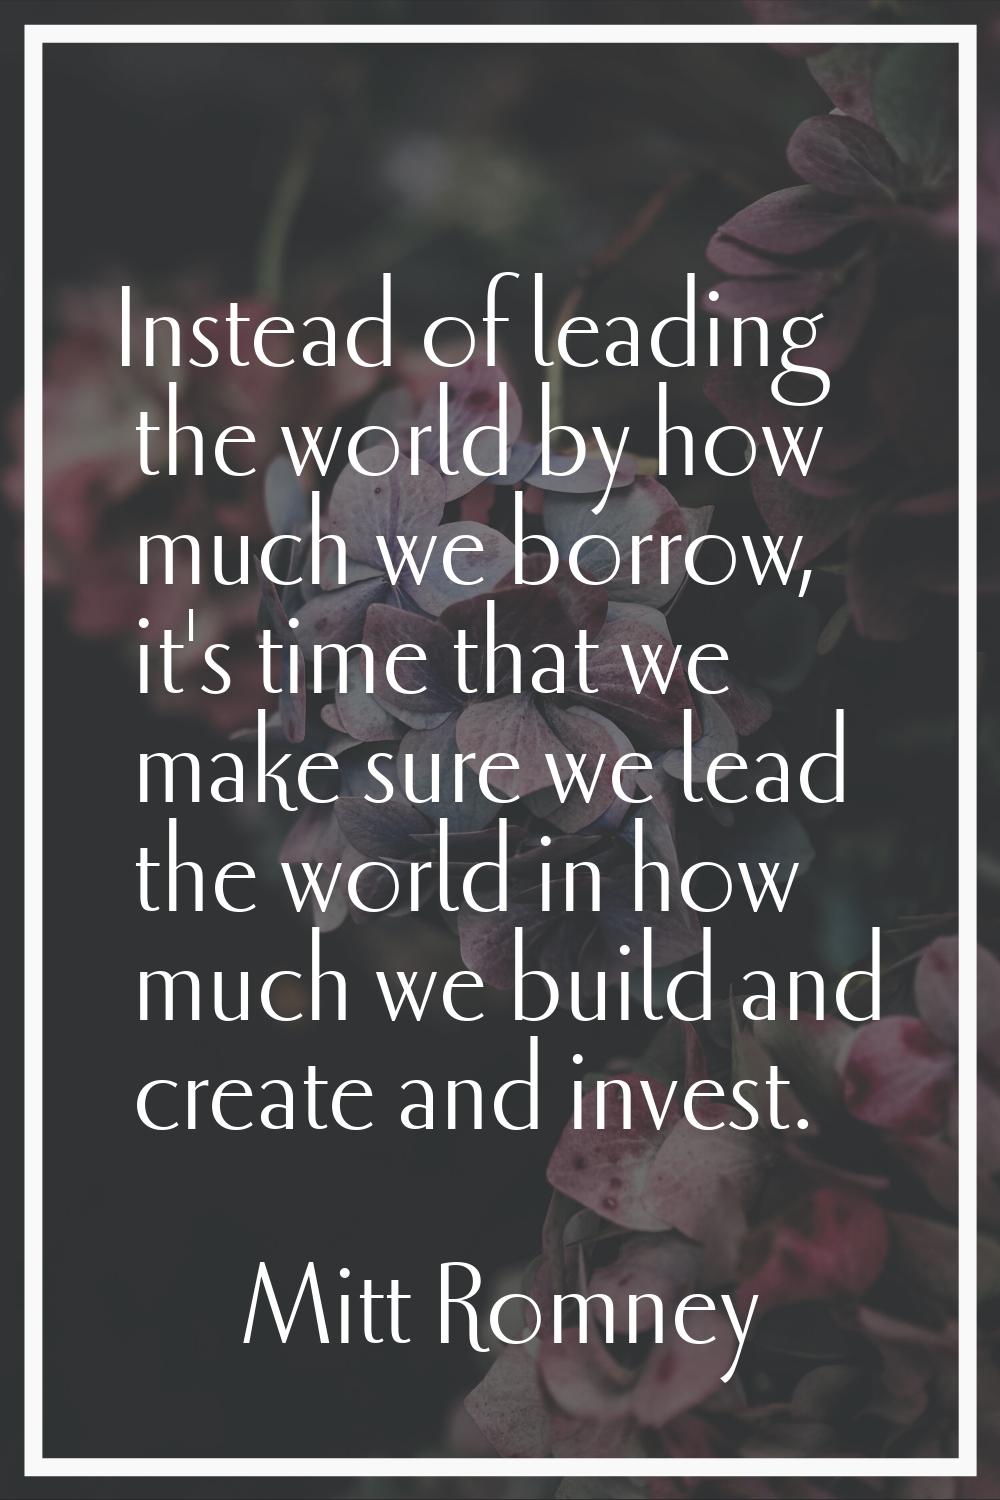 Instead of leading the world by how much we borrow, it's time that we make sure we lead the world i